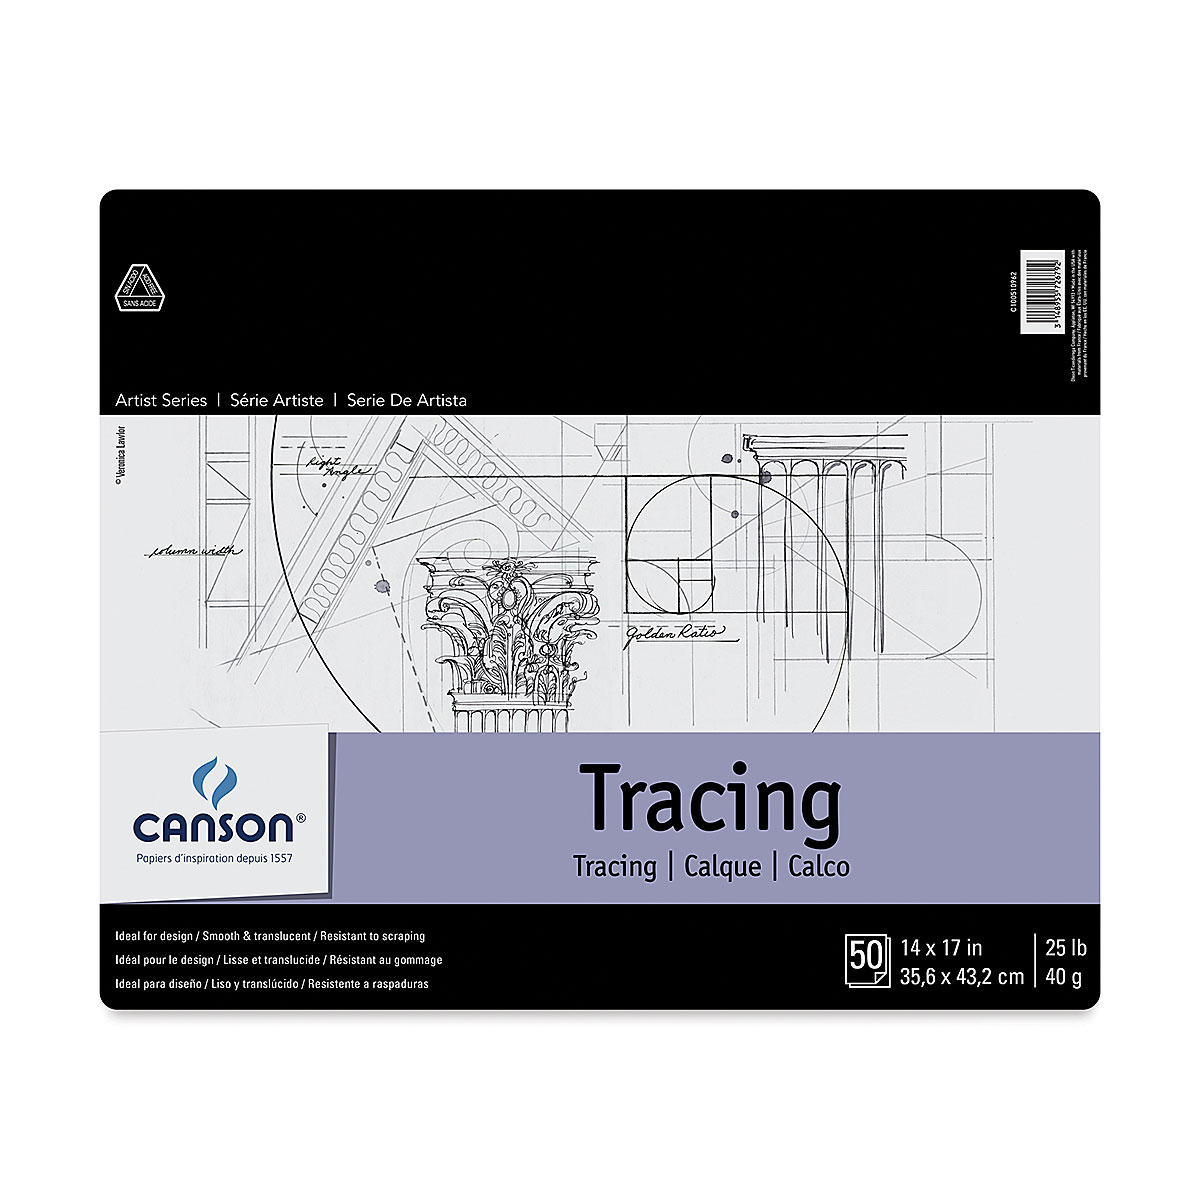 Canson Foundation Series Tracing Paper Pad 11-inch x 14-inch50 Sheets